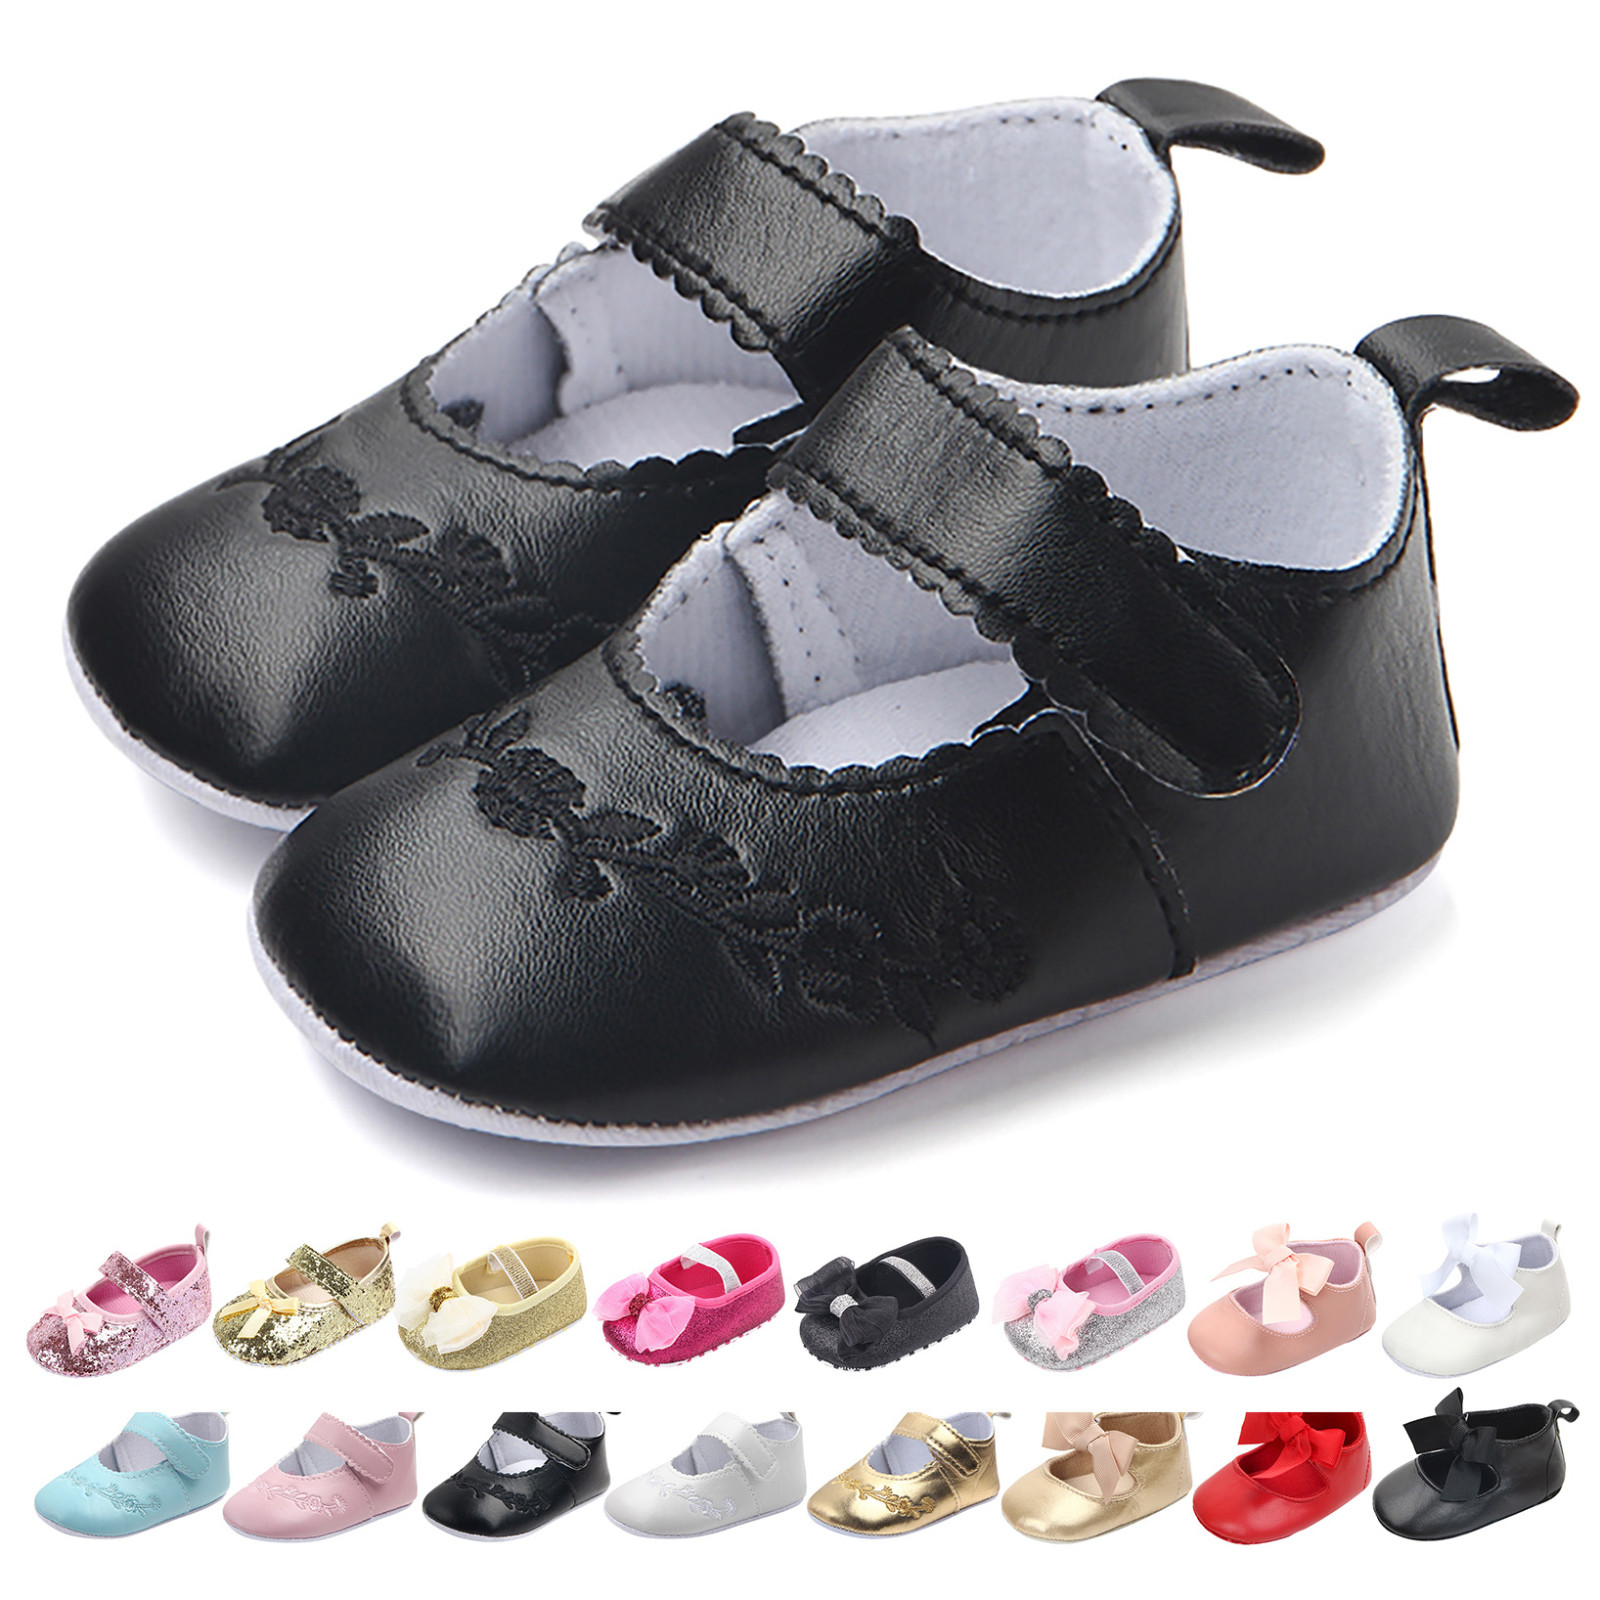 Walkers Shoes Soft Infant Shoes Girls Boys Shoes Toddler Toddler Baby